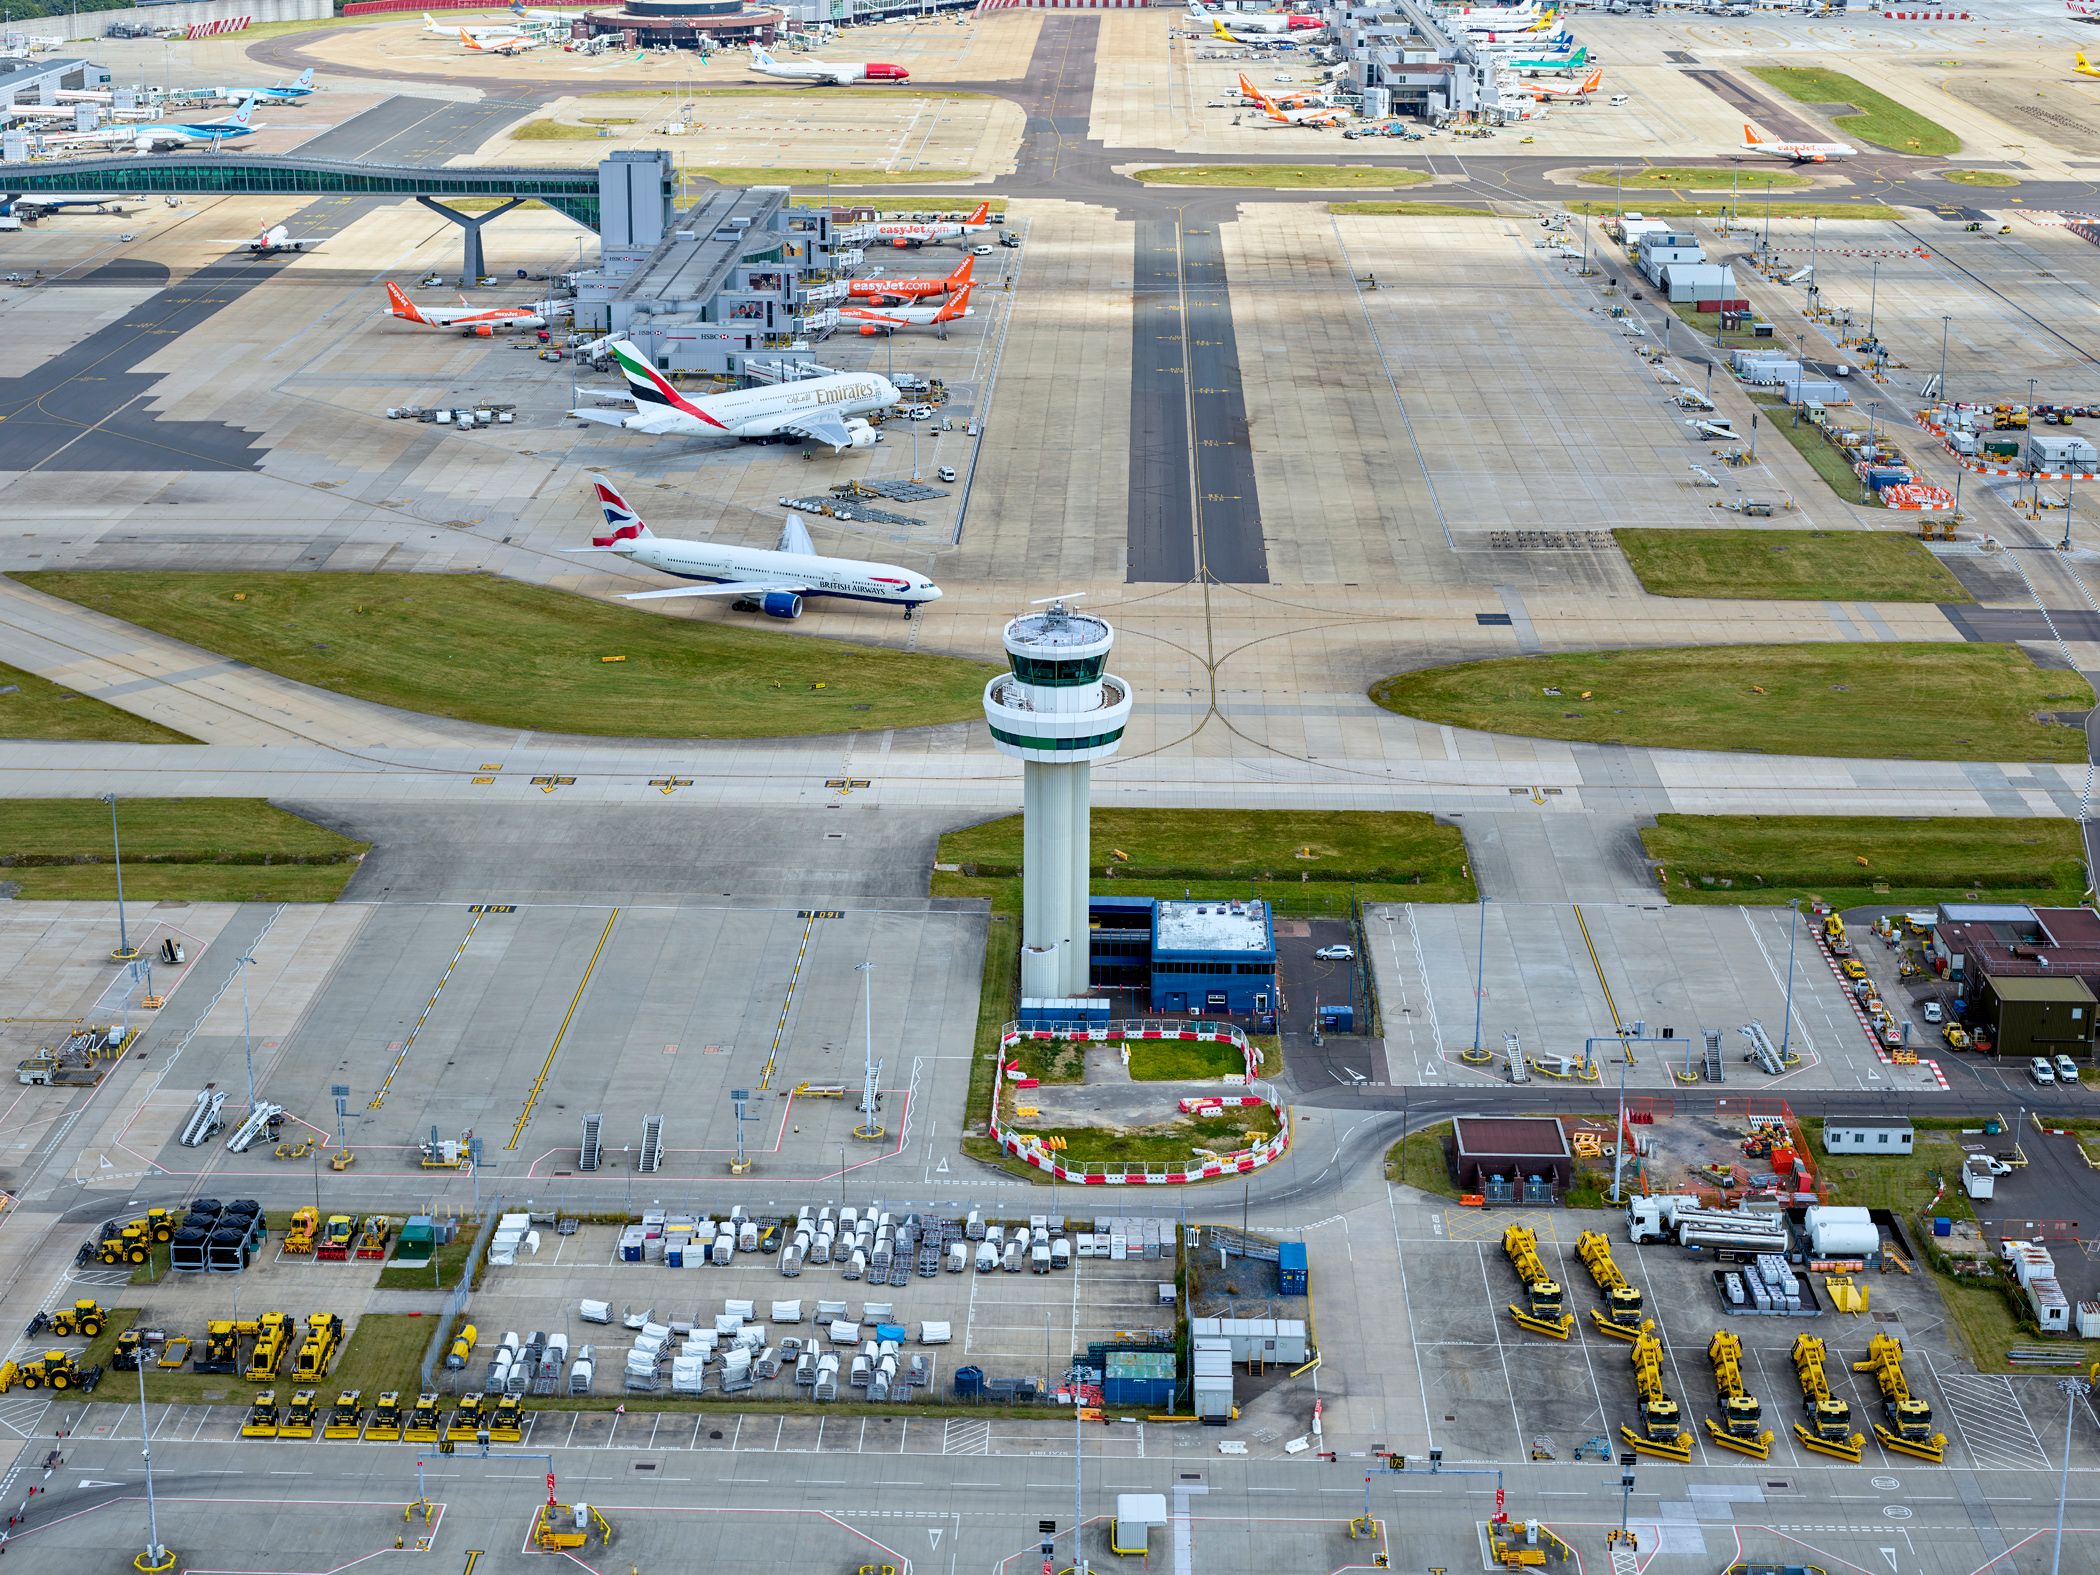 Aerial view of London Gatwick Airport.